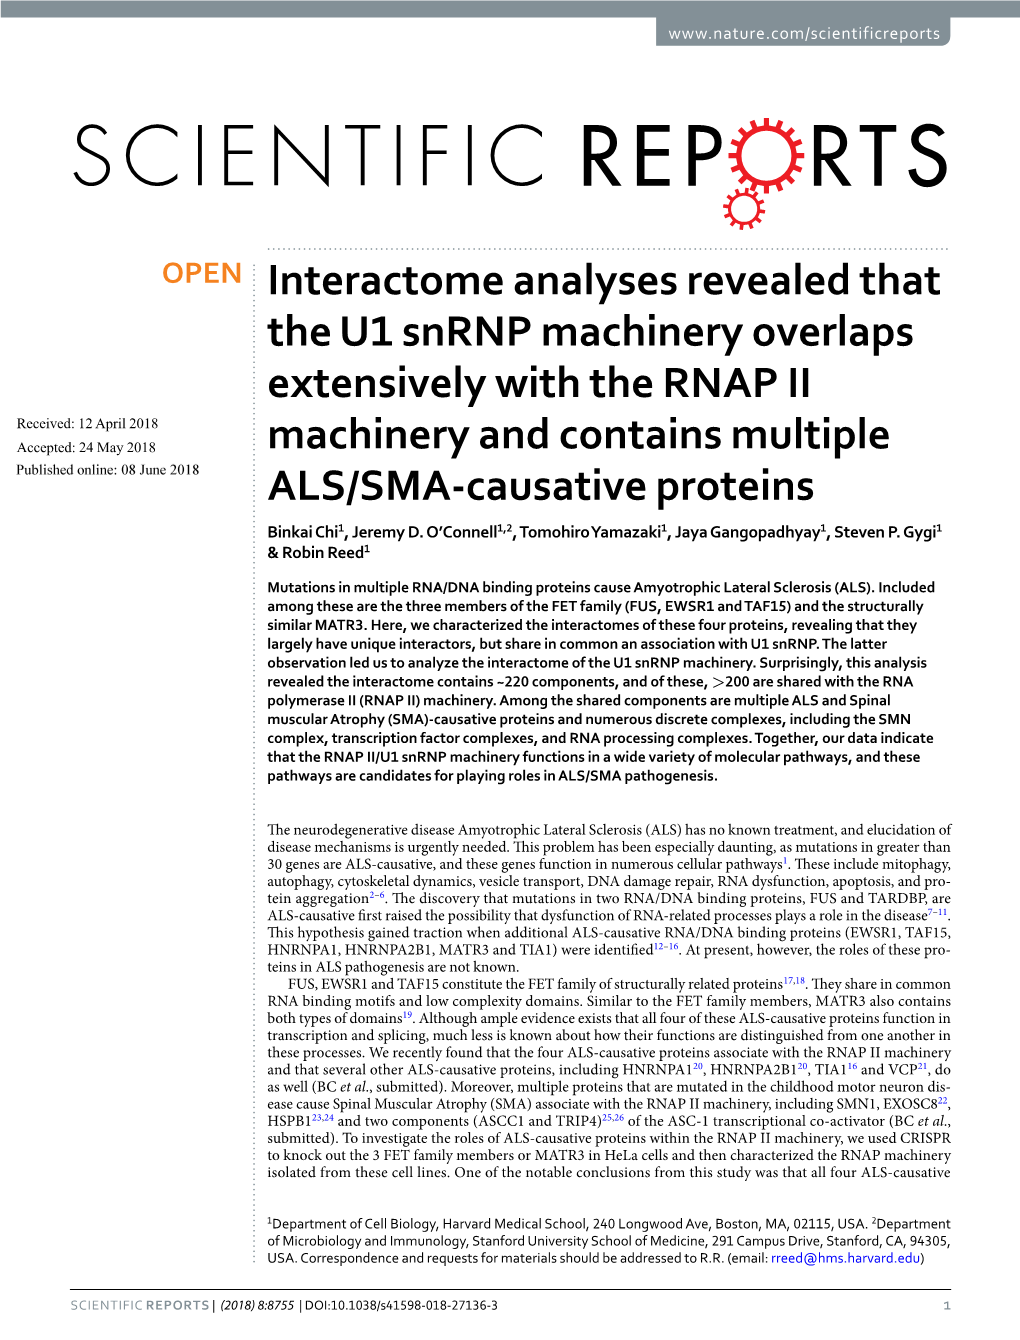 Interactome Analyses Revealed That the U1 Snrnp Machinery Overlaps Extensively with the RNAP II Machinery and Contains Multiple